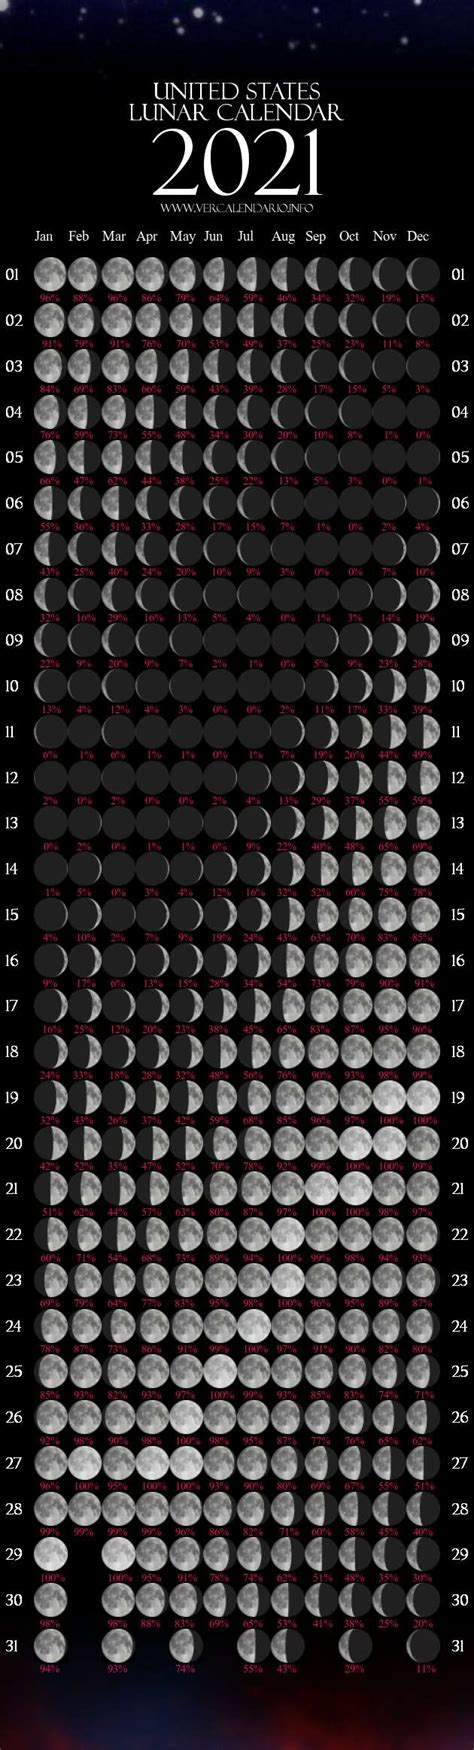 The calendar shows the moon phases of a year. 2021 Lunar Calendar Printable Pdf | 2021 Printable Calendars